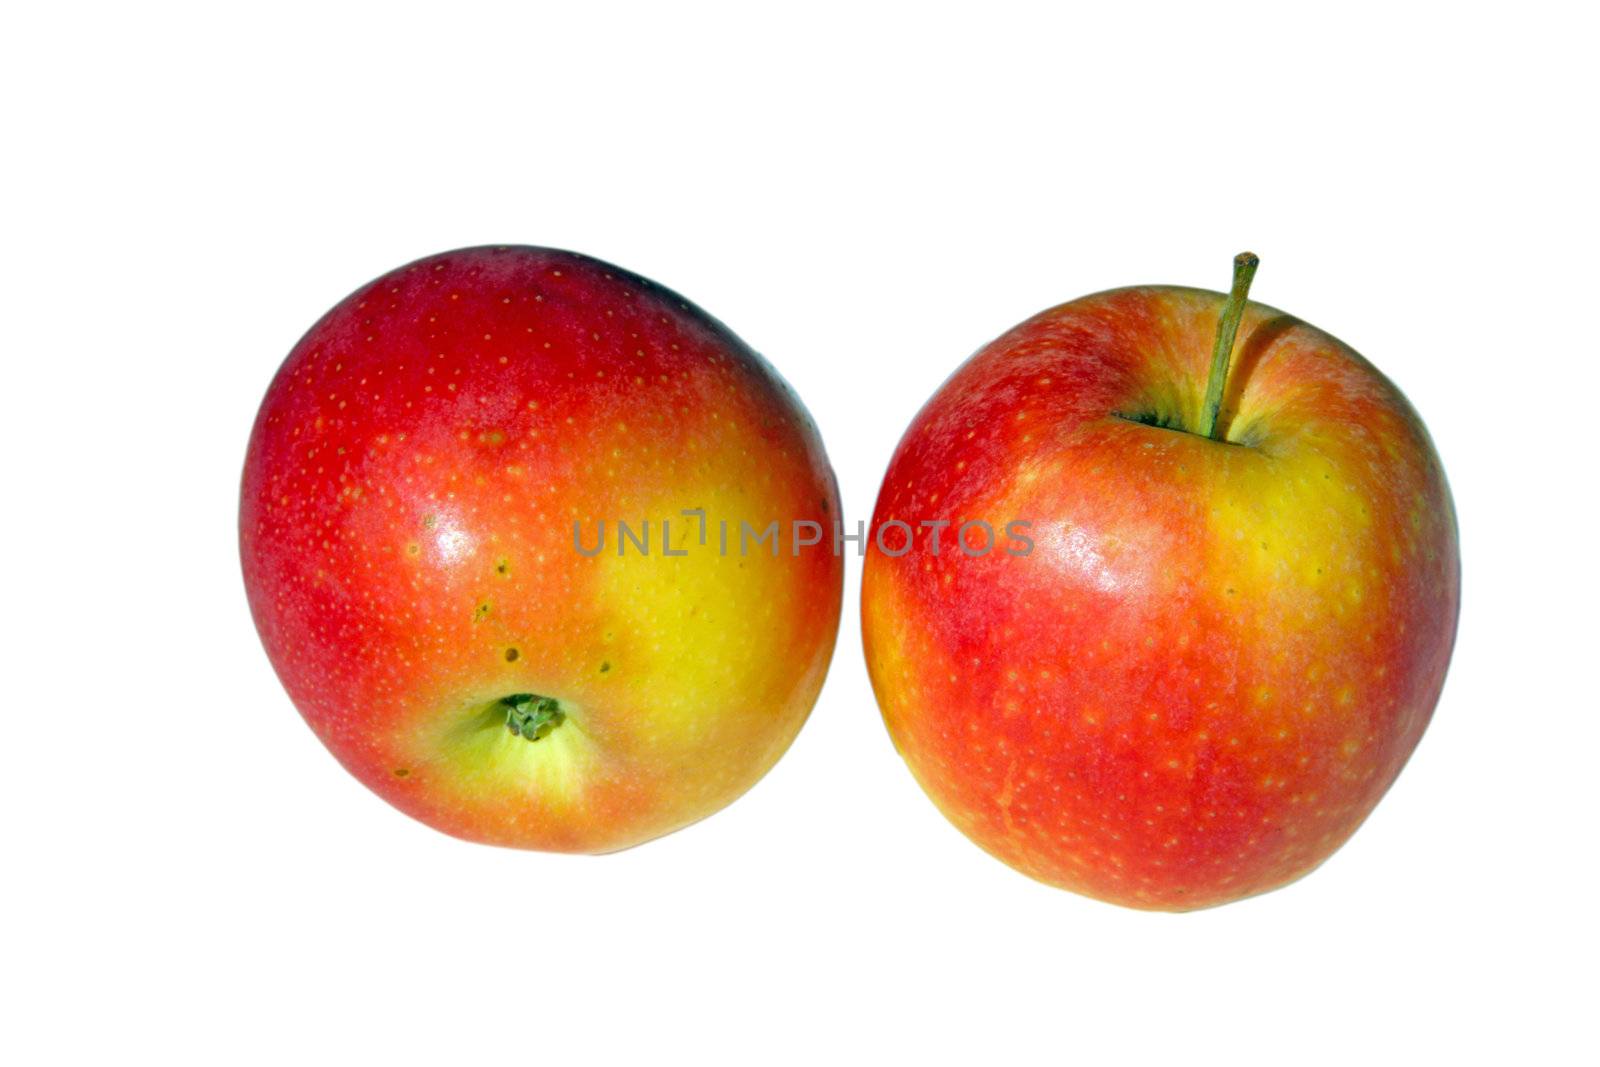 Two apples in red and greenish color